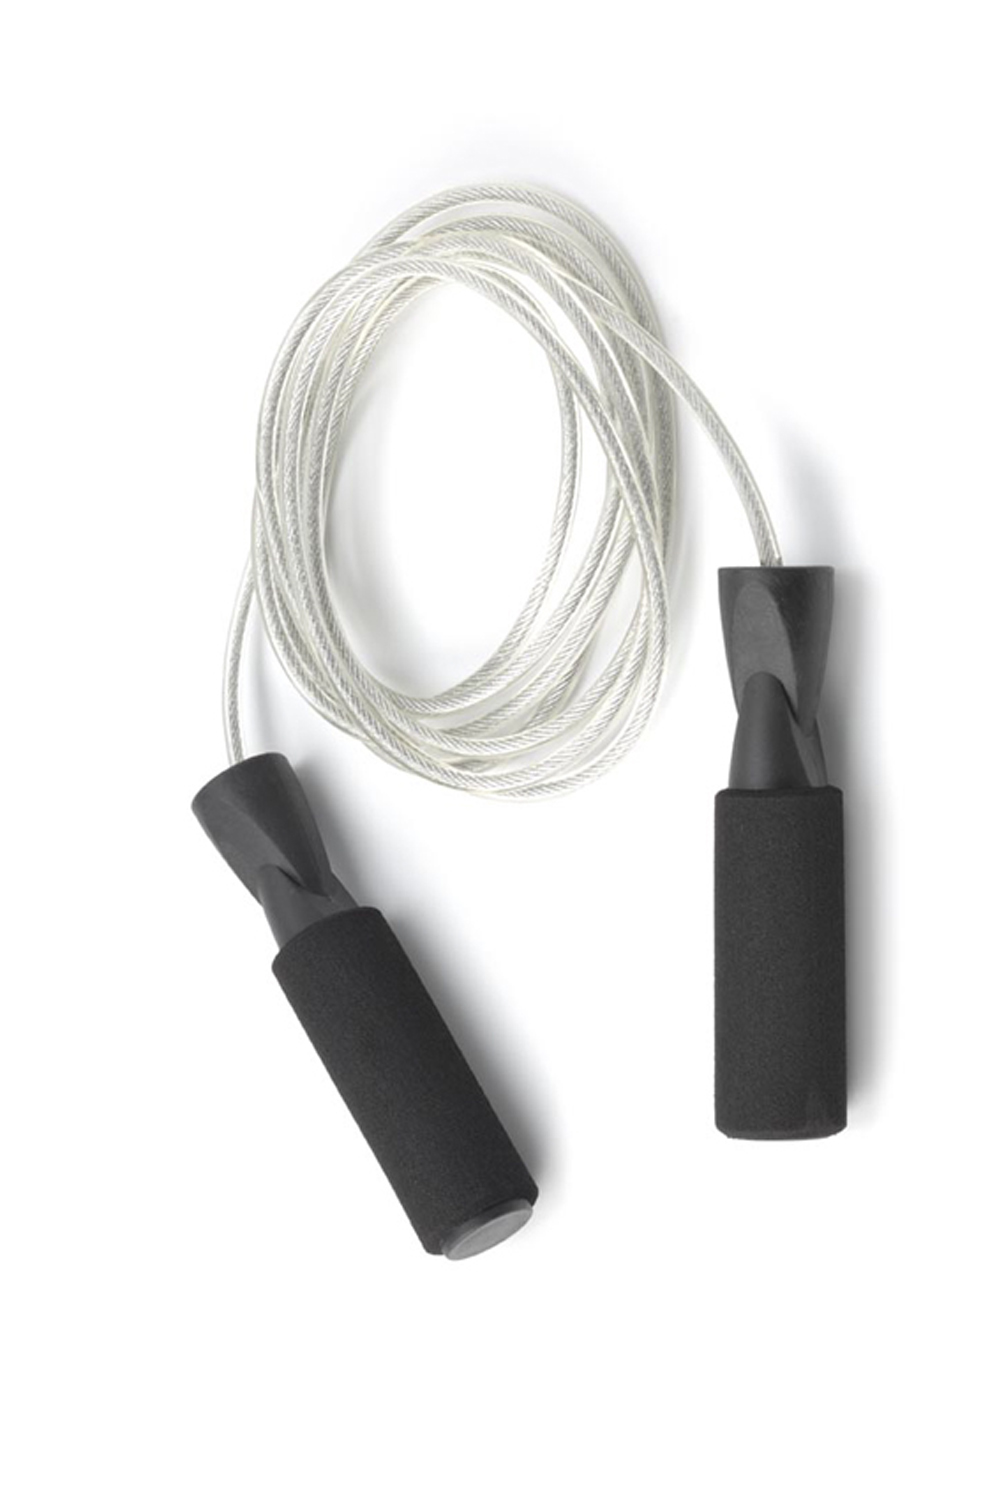 Tunturi-Bremshey Skipping Rope With Pvc Coated Steel Cable Stuk